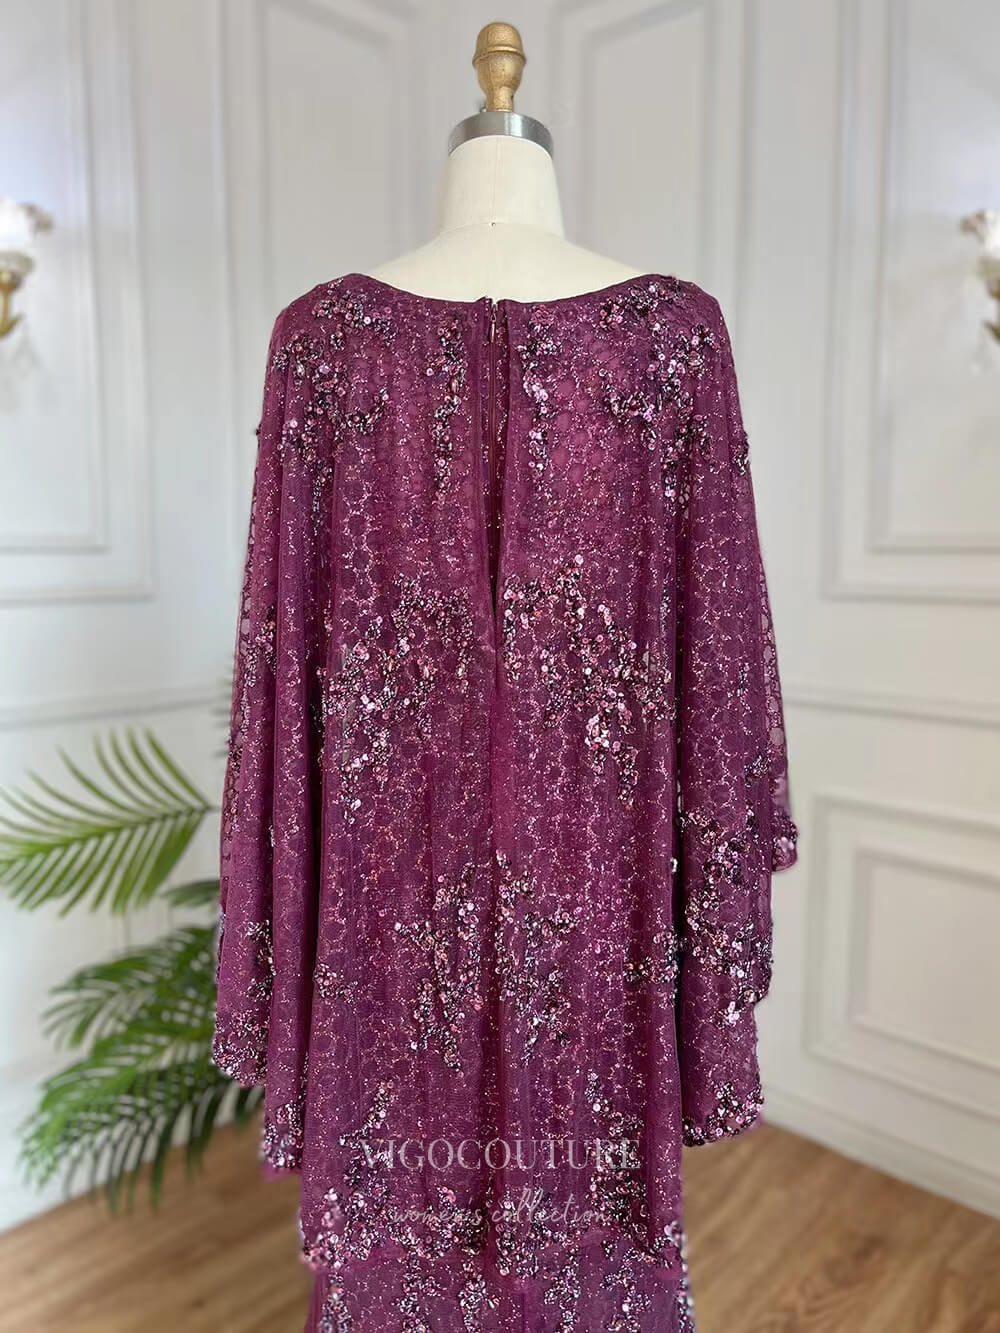 Burgundy Beaded 20s Prom Dresses Long Sleeve Mother of the Bride Dress 22138-Prom Dresses-vigocouture-Burgundy-US2-vigocouture